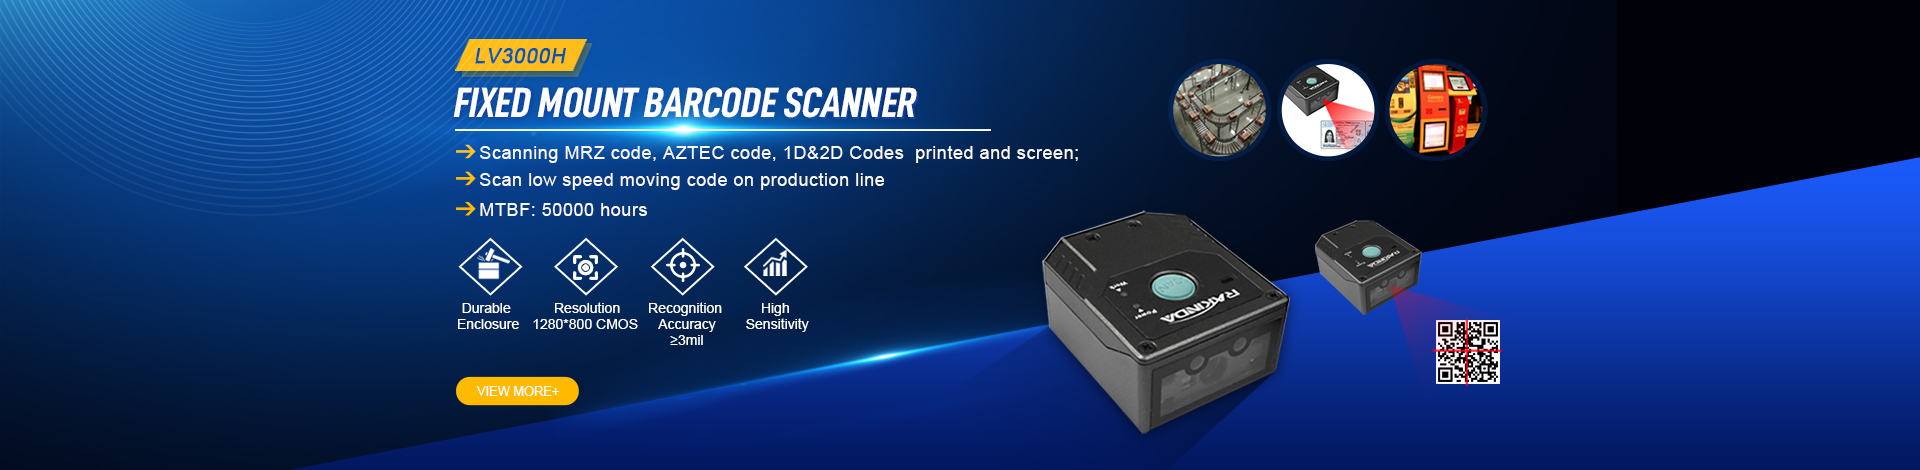 Fixed Mount Barcode Scanner